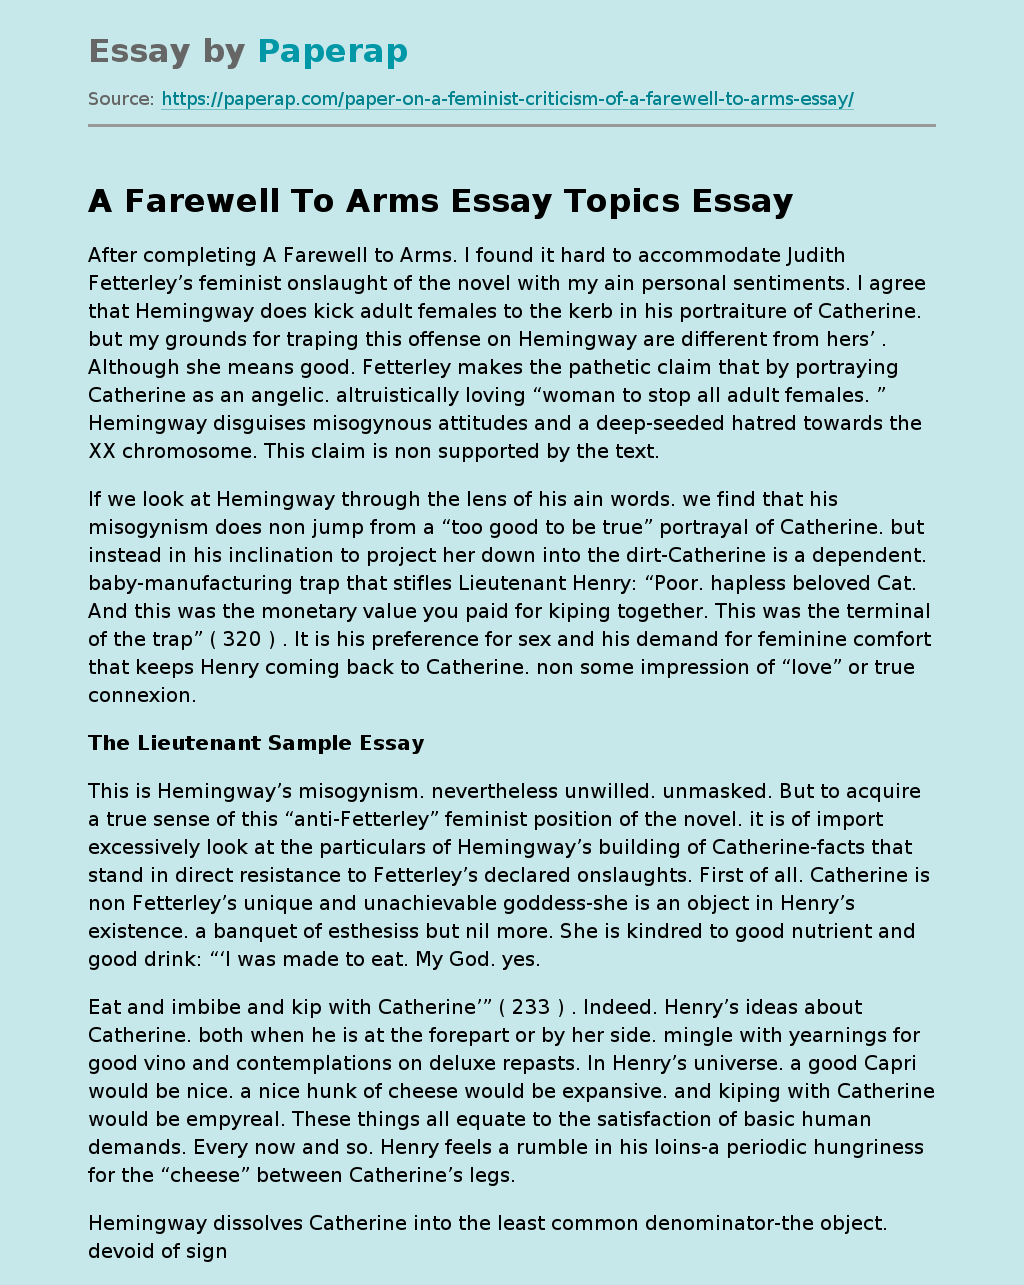 "A Farewell to Arms"